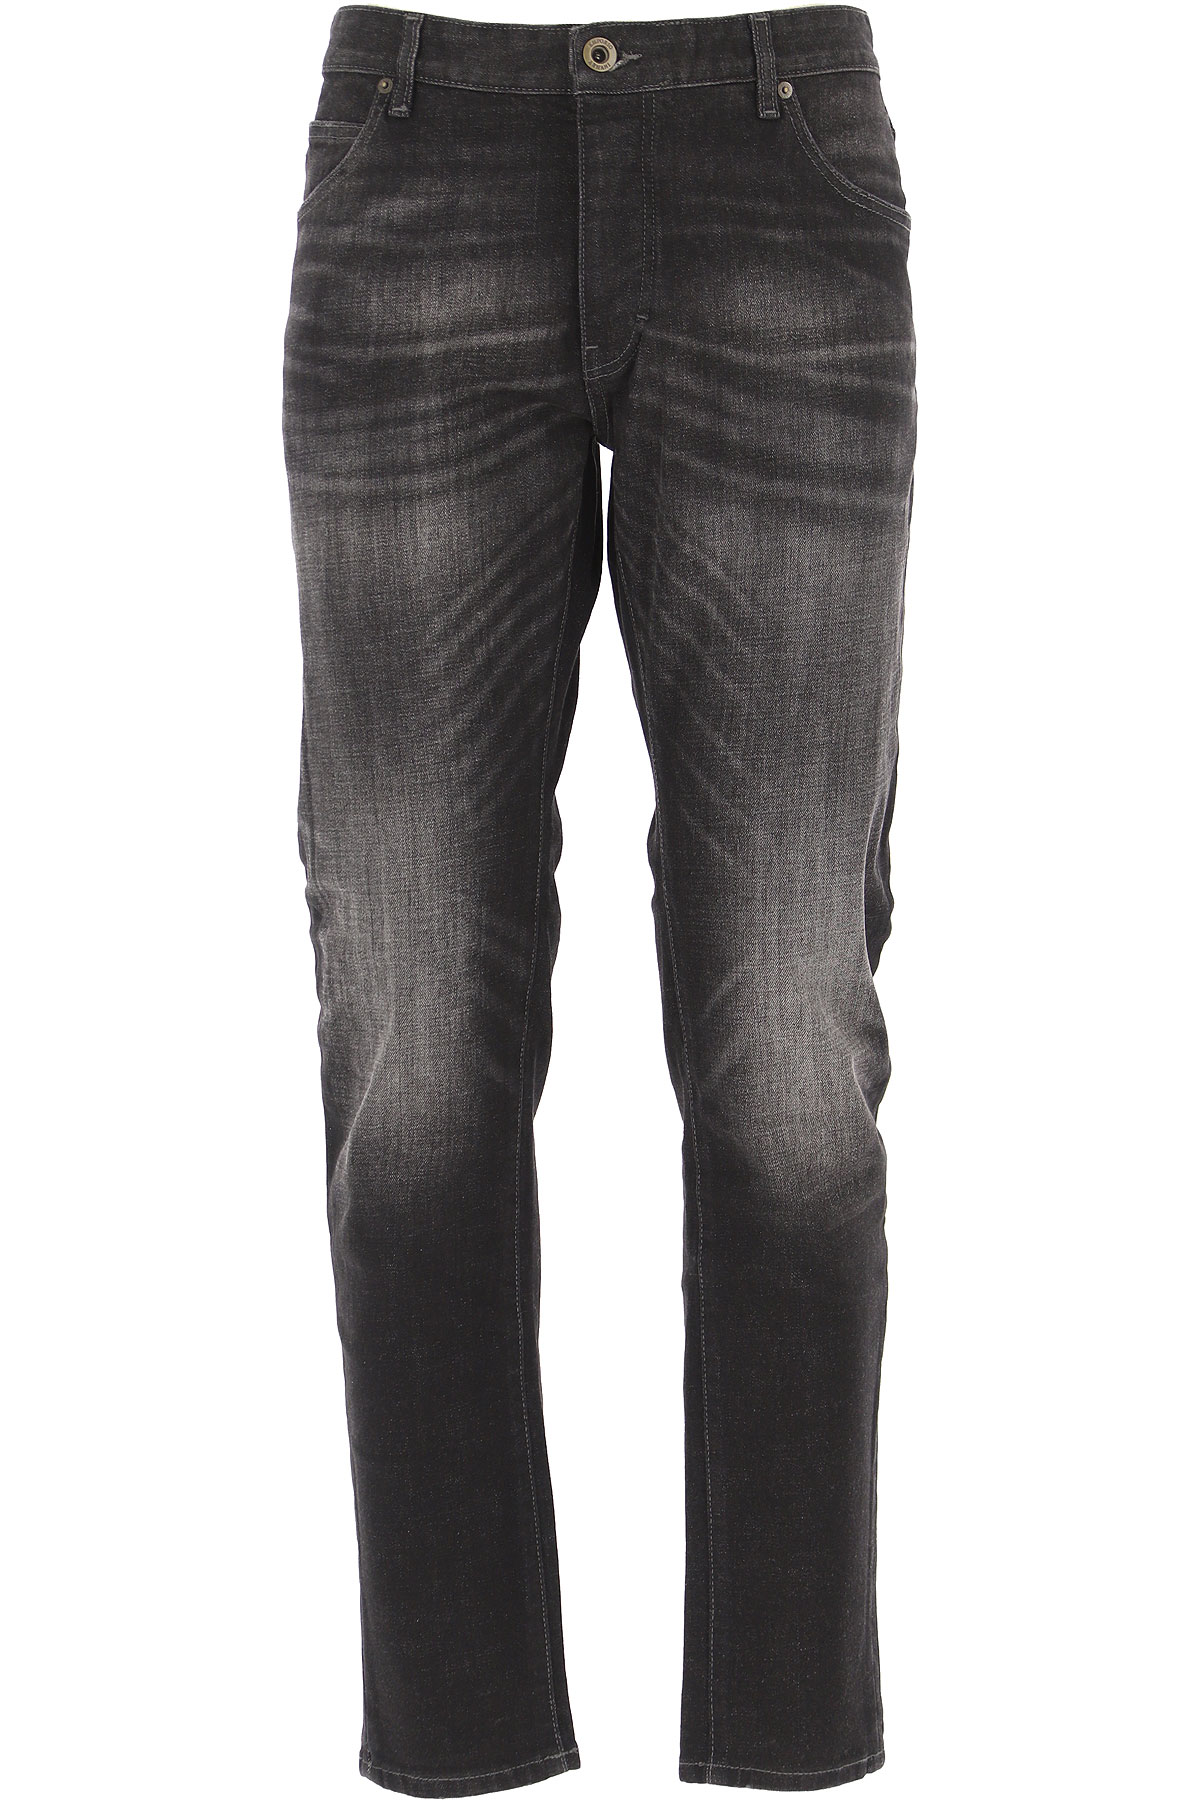 Mens Clothing Emporio Armani, Style code: 6h1j09-1d6yz-0005